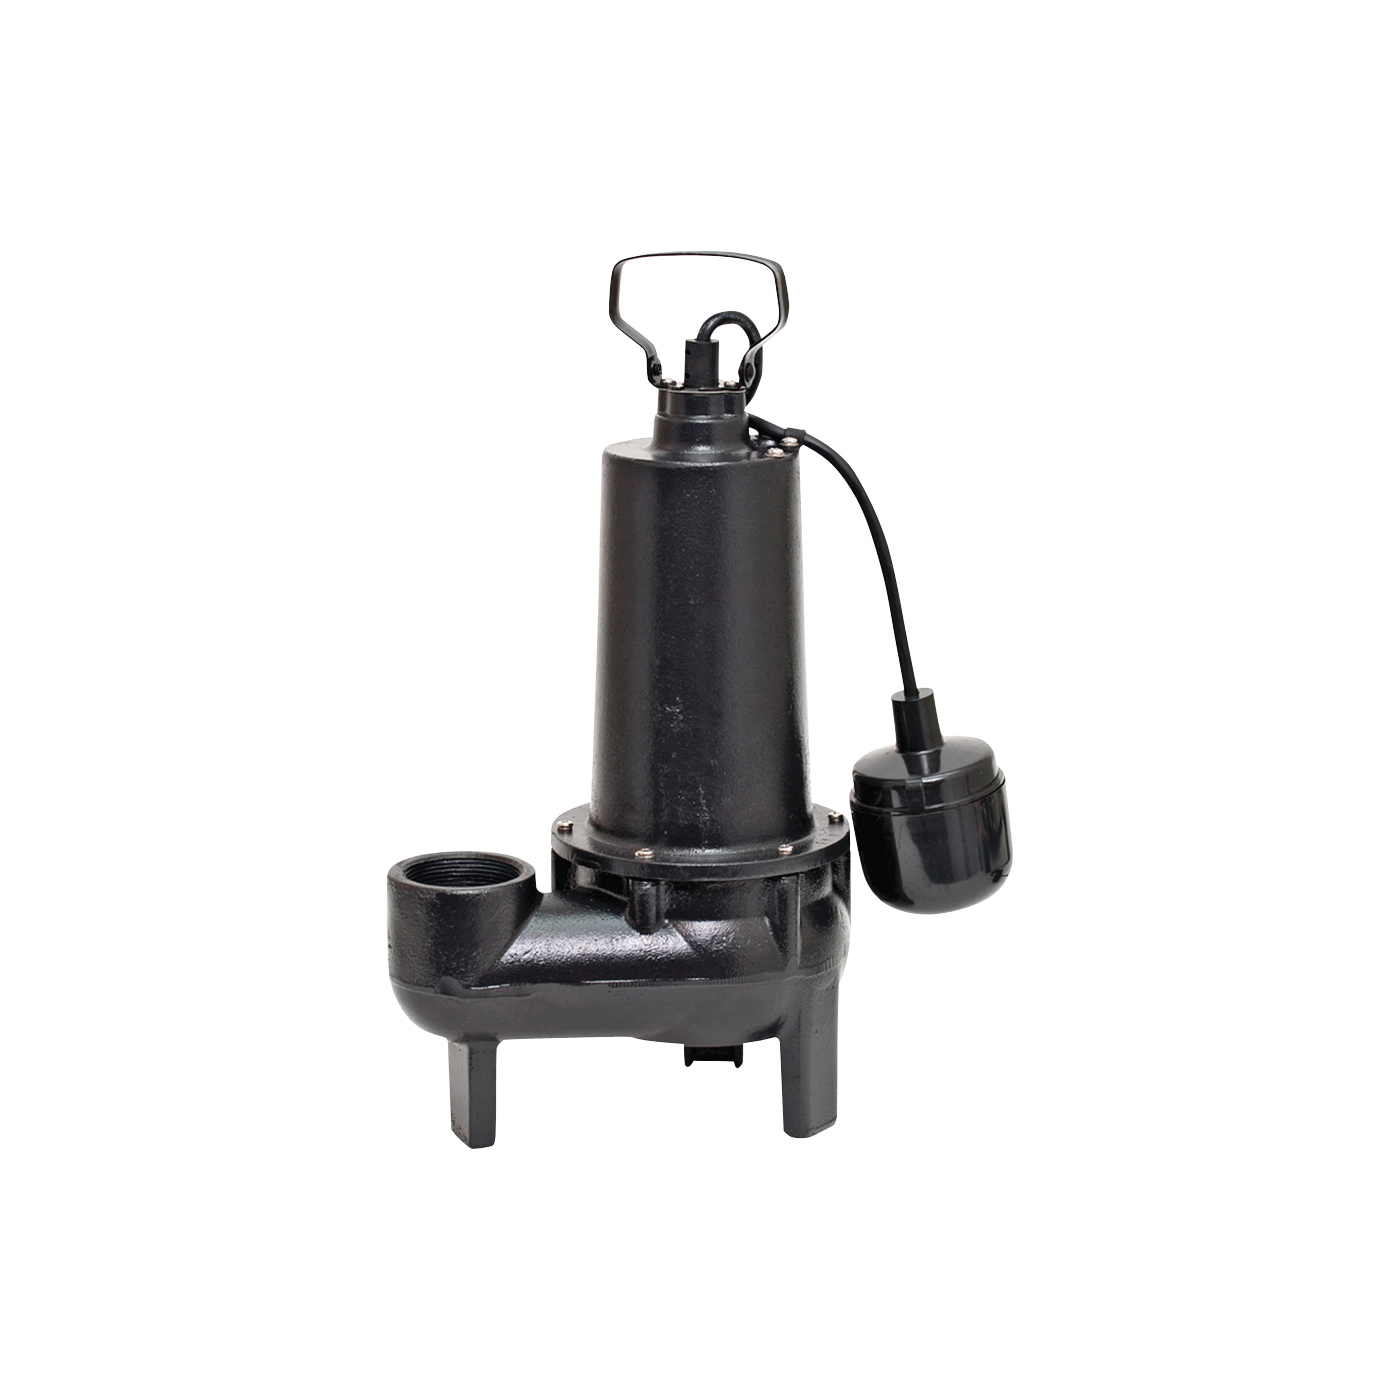 93501 Sewage Pump, 1-Phase, 7.6 A, 120 V, 0.5 hp, 2 in Outlet, 25 ft Max Head, 80 gpm, Iron